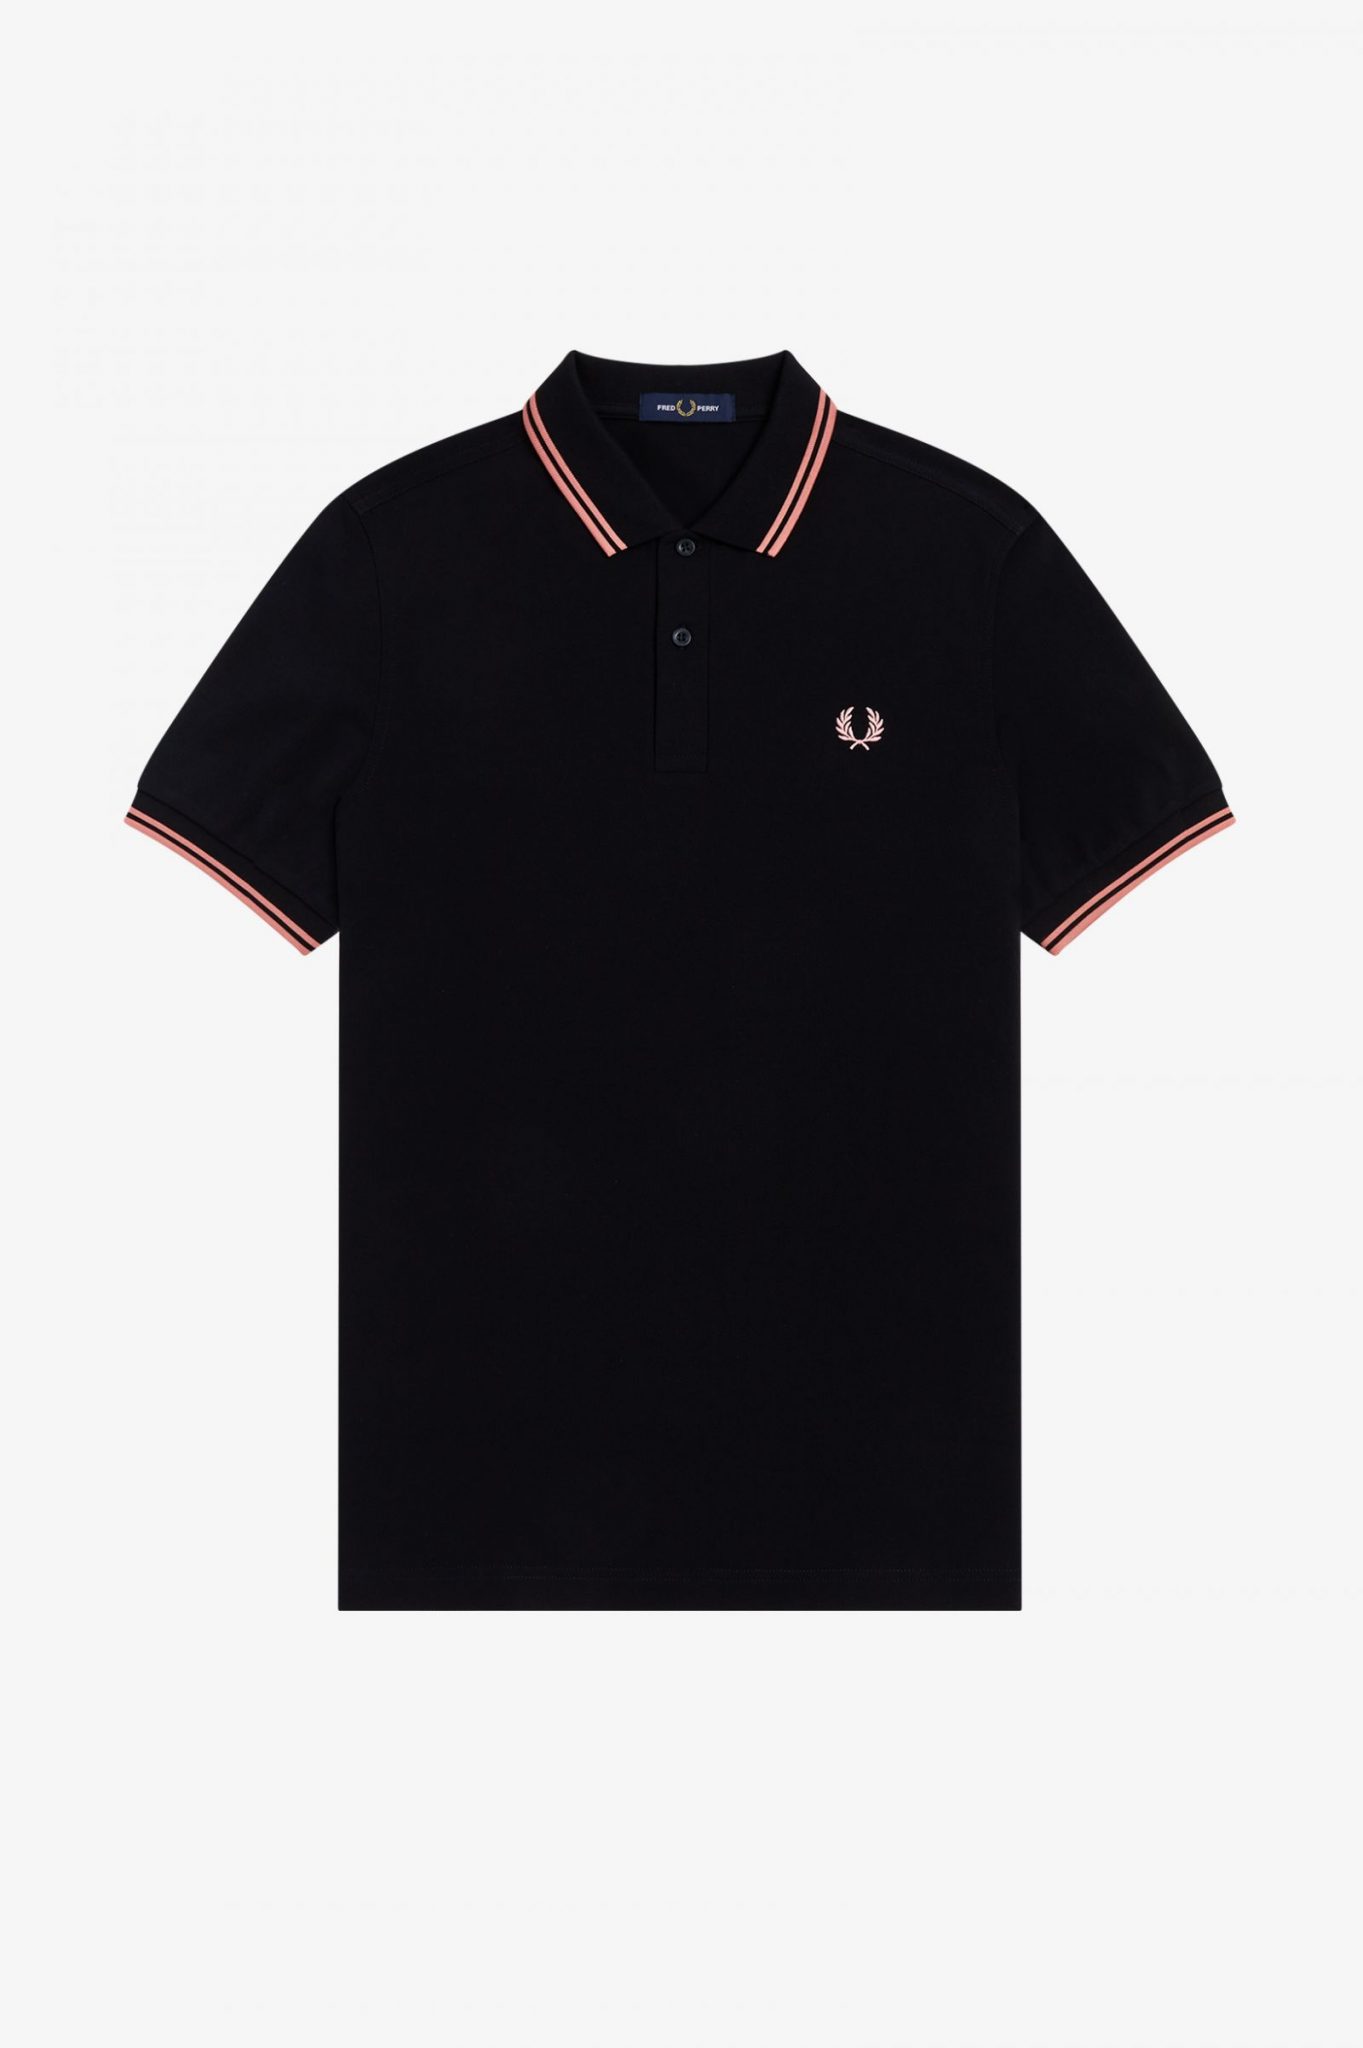 Buy Fred Perry M3600 Pique Black/Pink Peach - Scandinavian Fashion Store